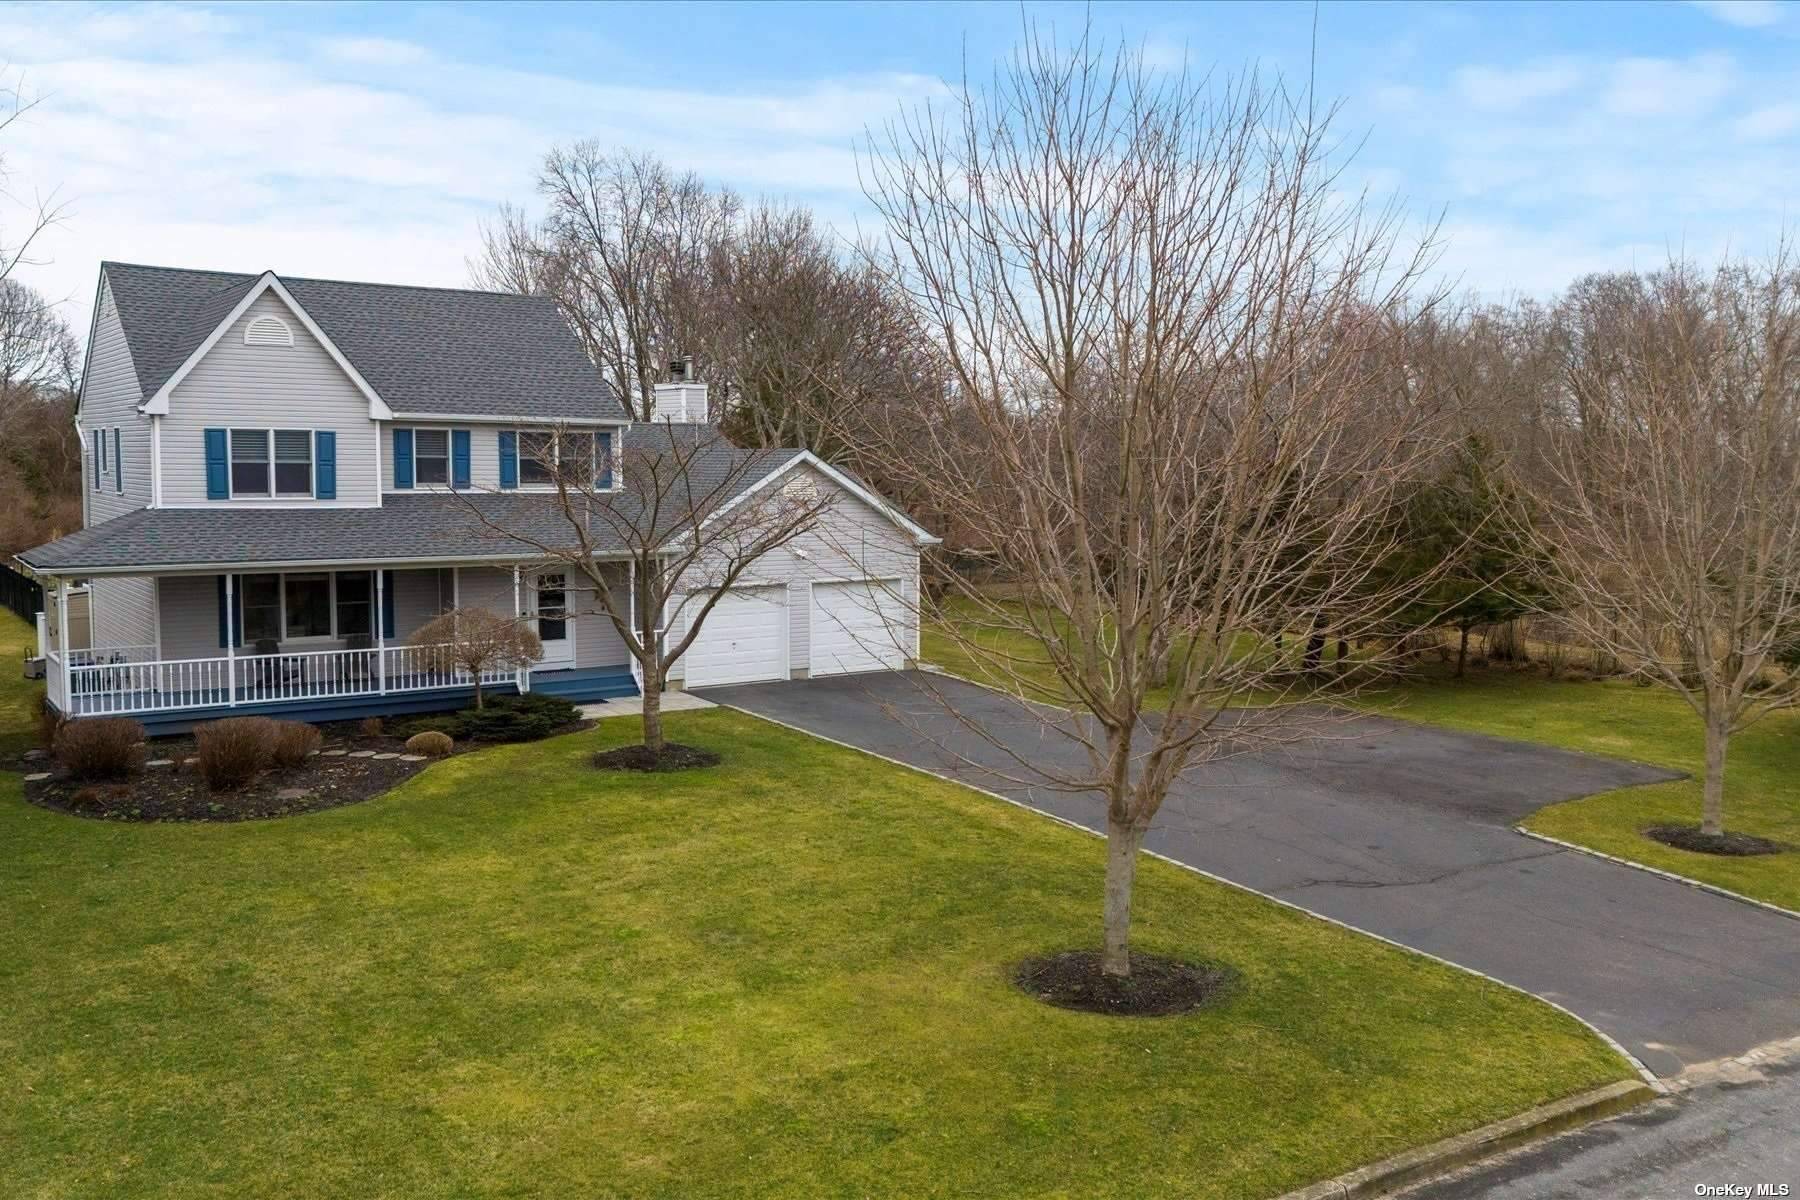 Welcome to this stunning four bedroom colonial home situated on a spacious one acre lot.